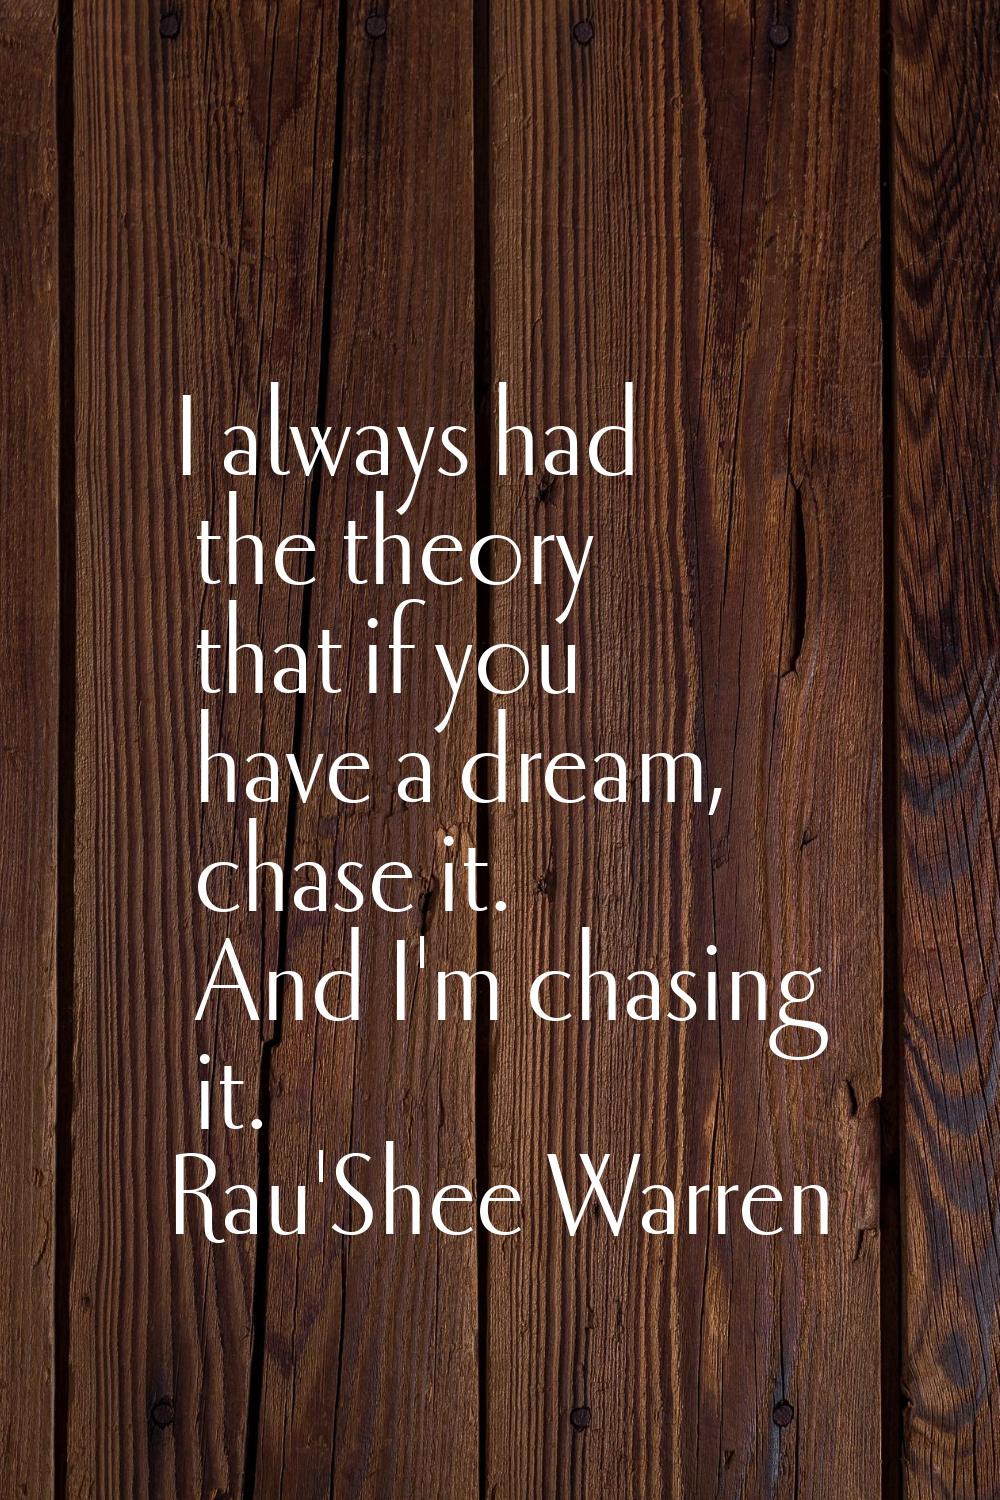 I always had the theory that if you have a dream, chase it. And I'm chasing it.